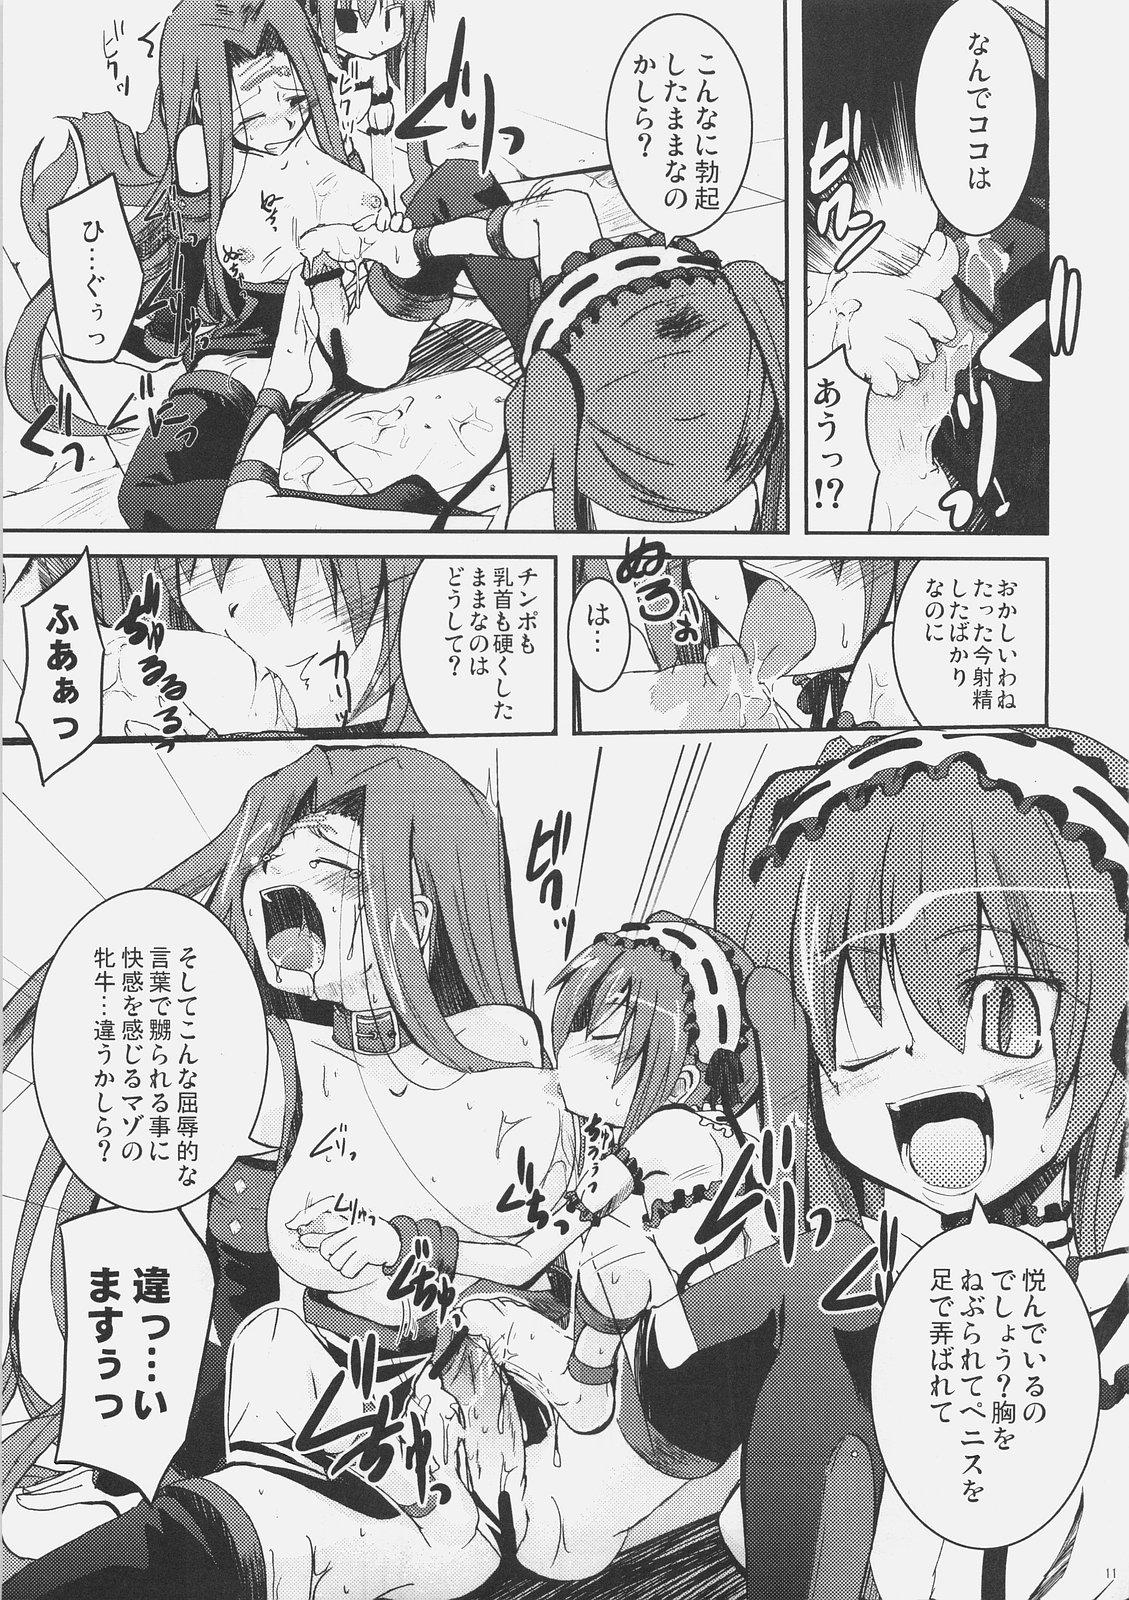 Mms Candy cutie sadist - Fate stay night Brother Sister - Page 10